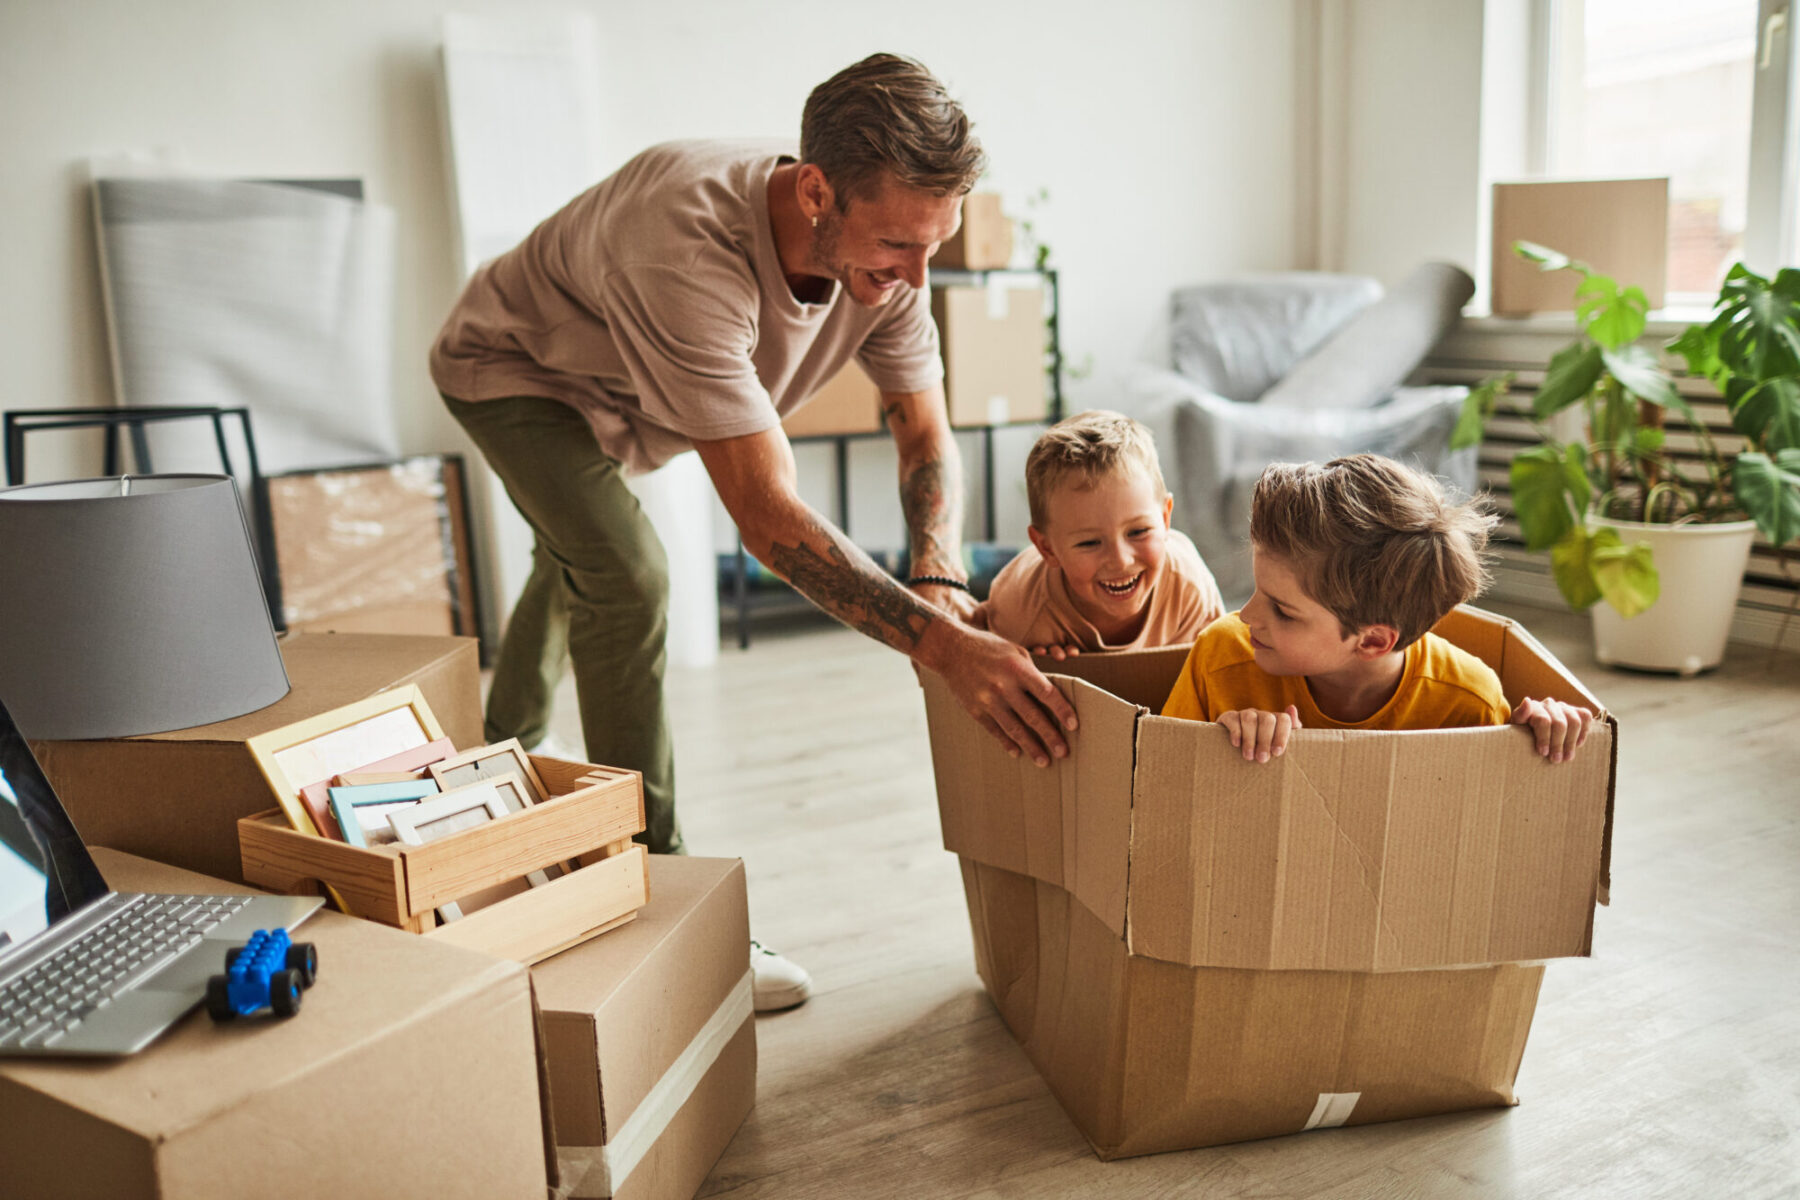 When Do Divorced Parents Need the Court’s Permission to Relocate? 